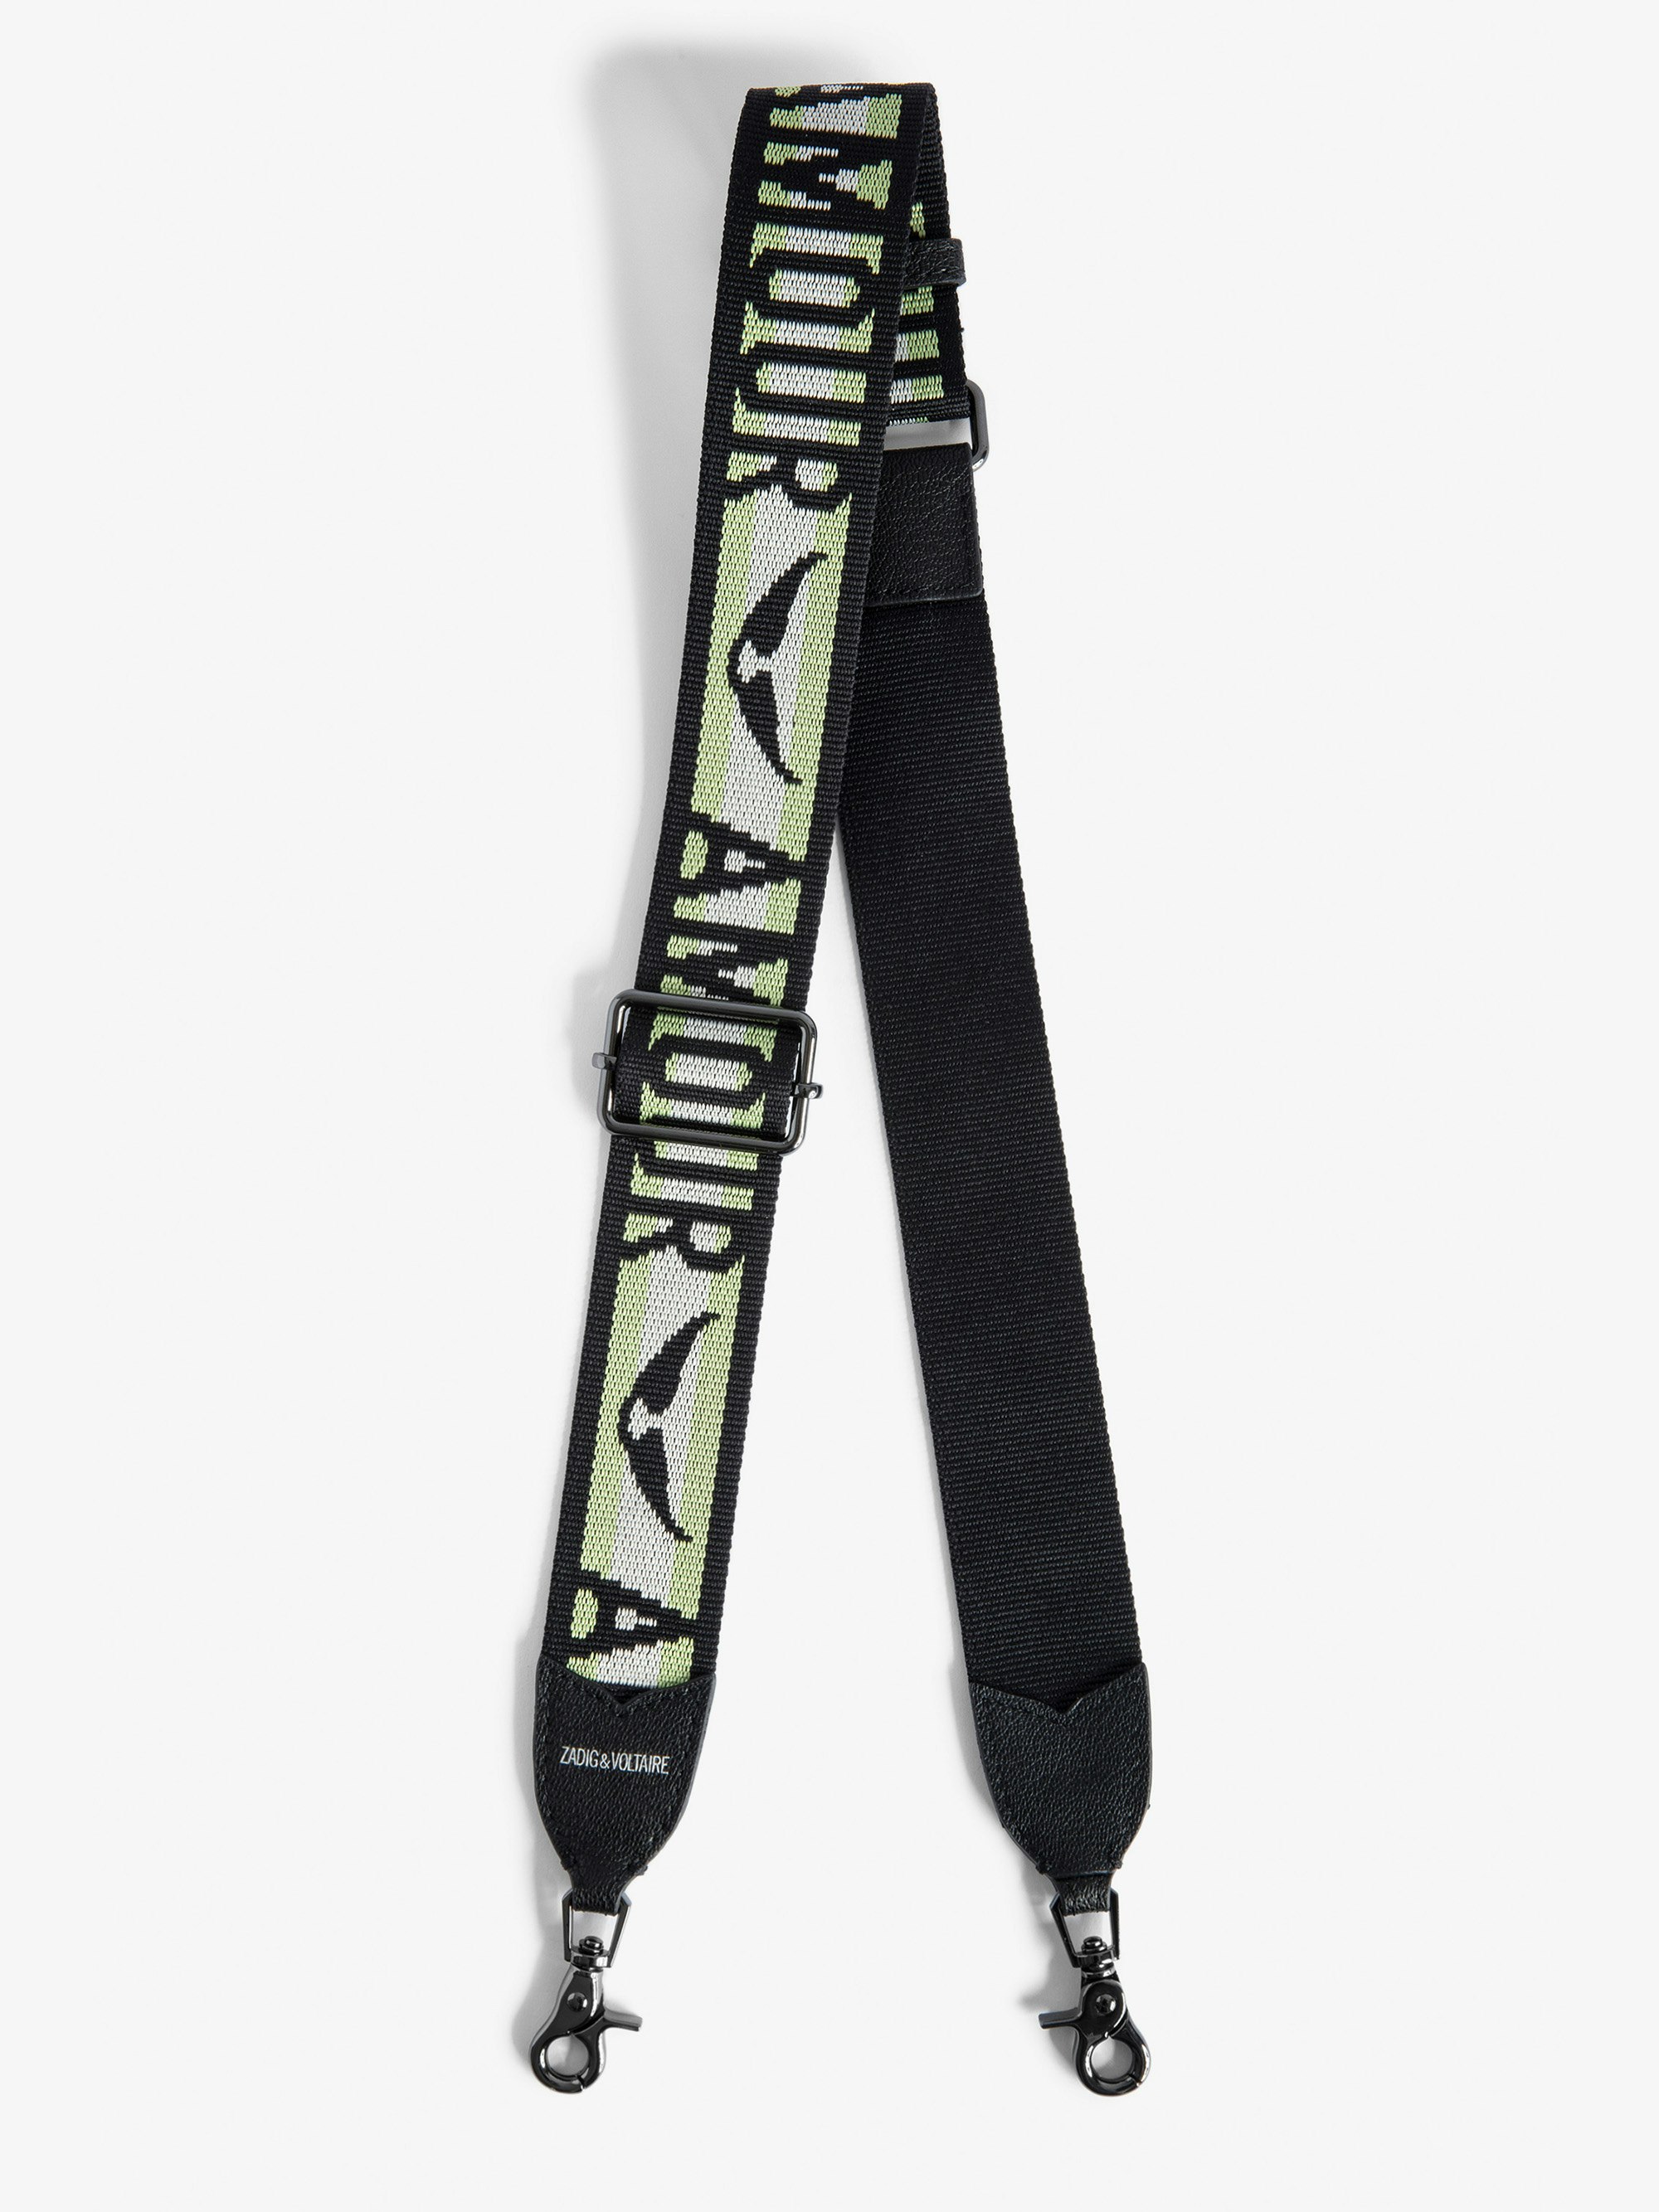 Zadig Shoulder Strap - Women’s green leather and nylon shoulder strap with “Amour” slogan and wings motif.